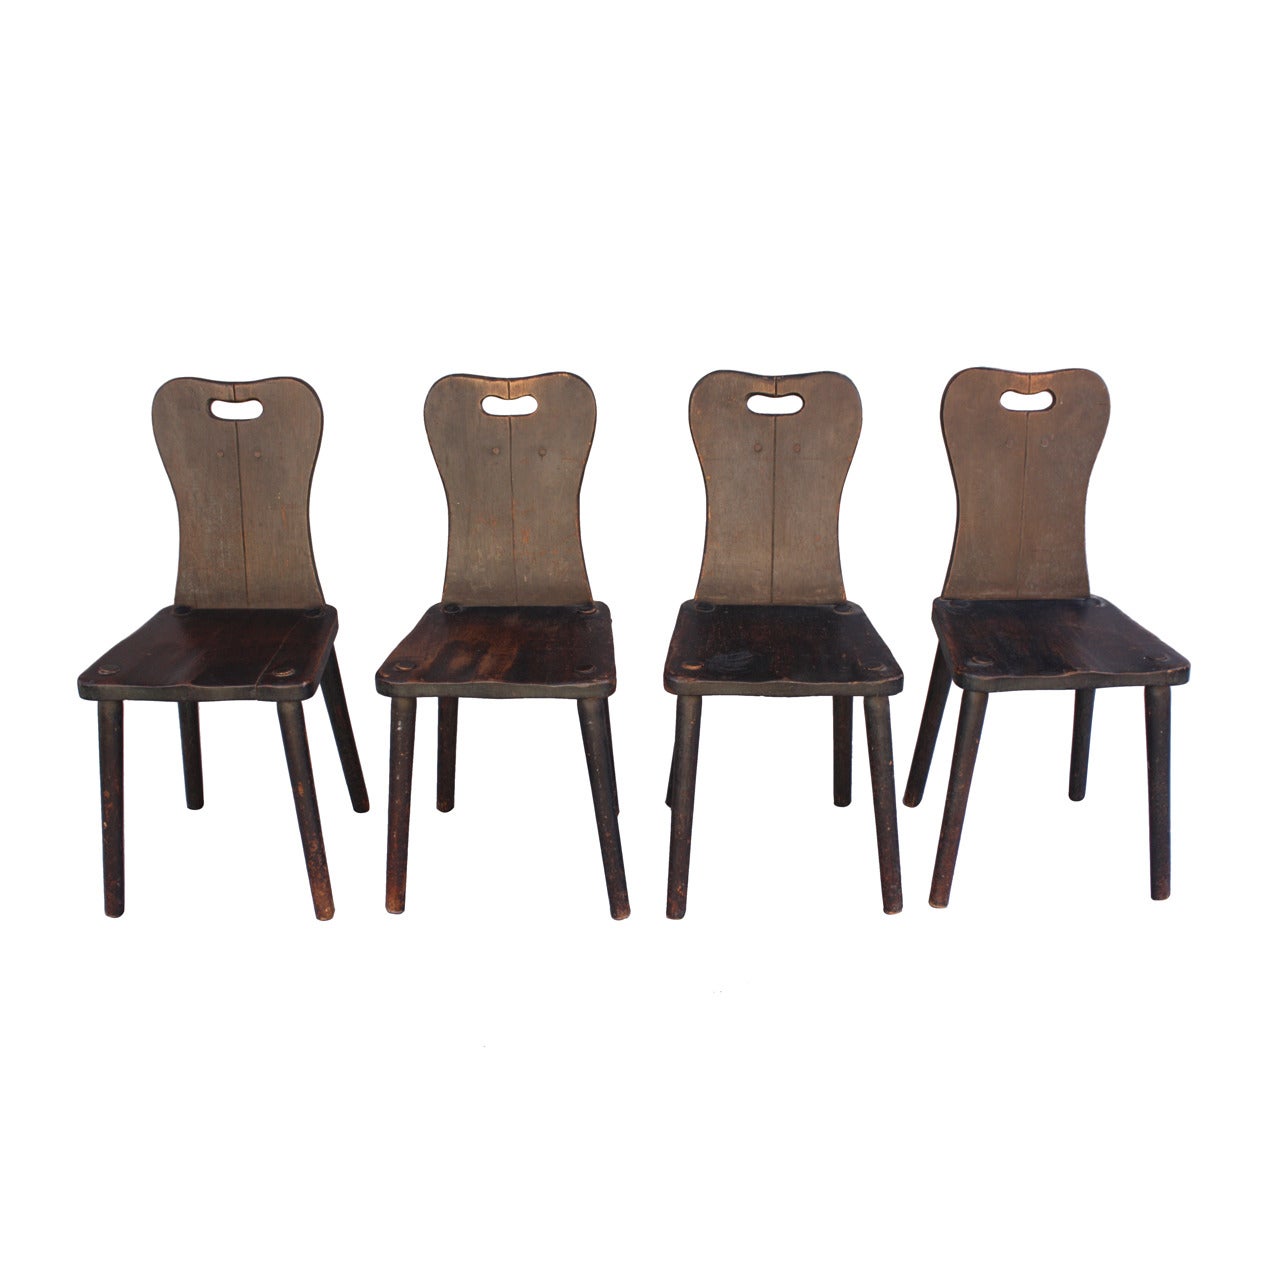 Set of Four Monterey Period Side Chair